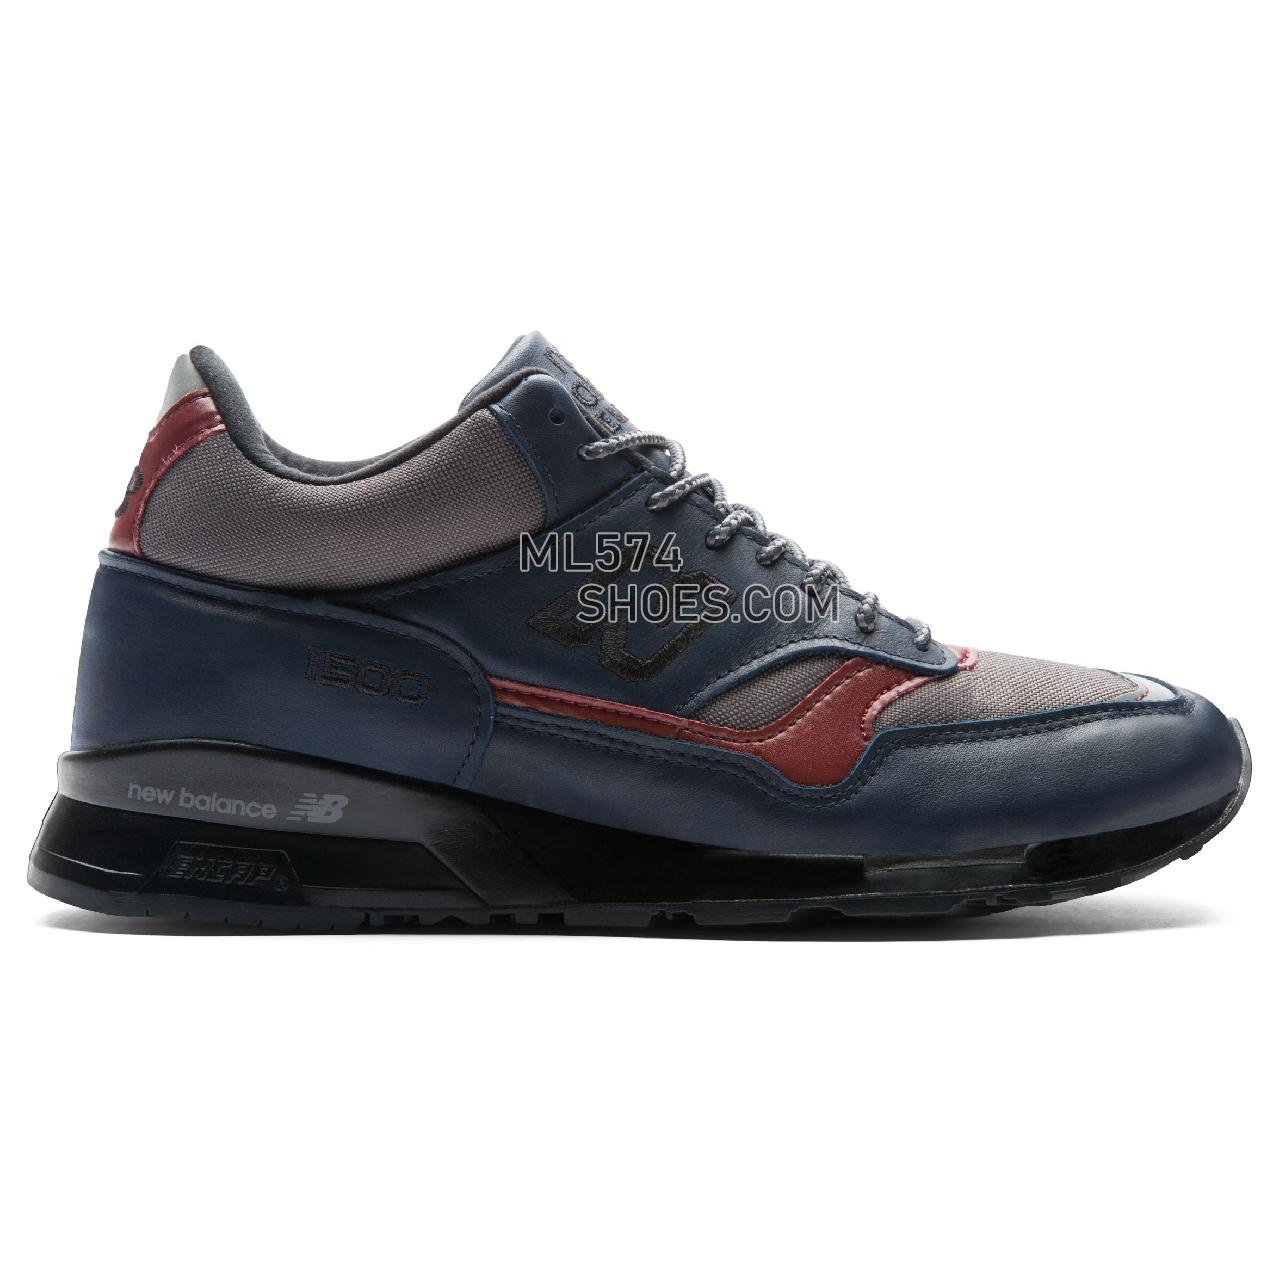 New Balance 1500 Made in UK - Men's 1500 Made in UK Classic MH1500-EP - Navy with Grey and Burgundy - MH1500NG